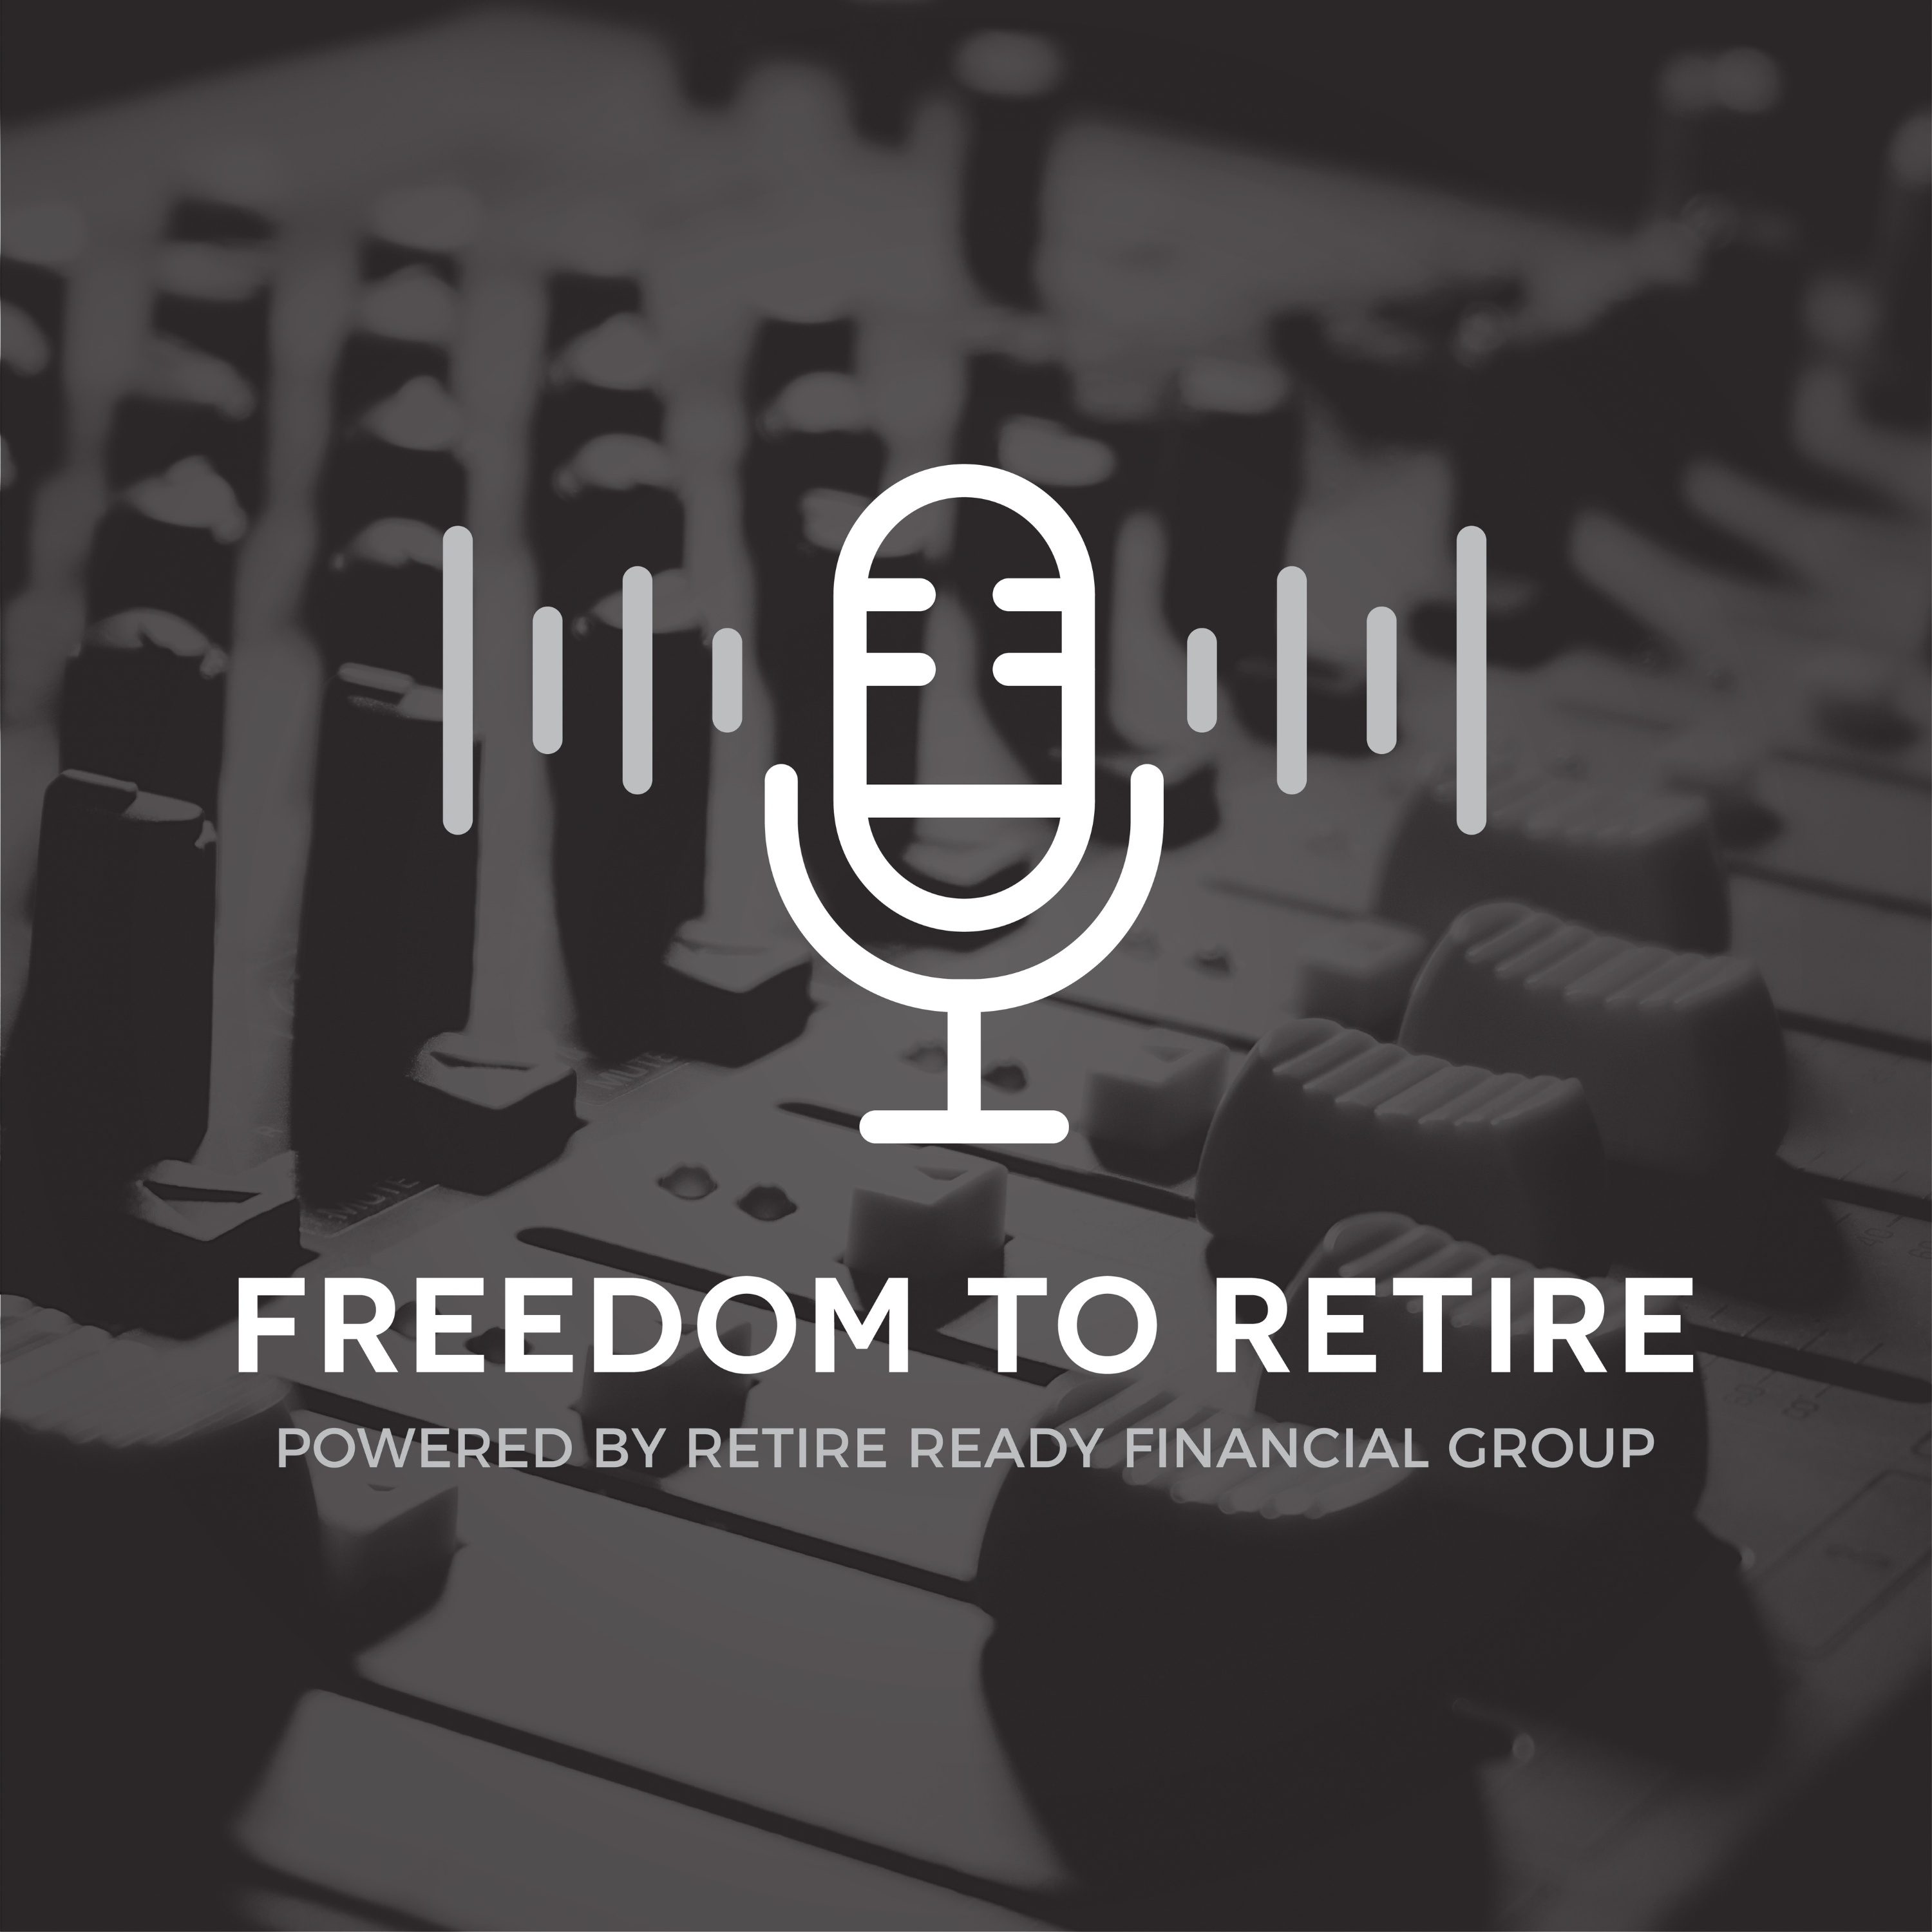 What Does Delaying Your Retirement Get/Cost You?